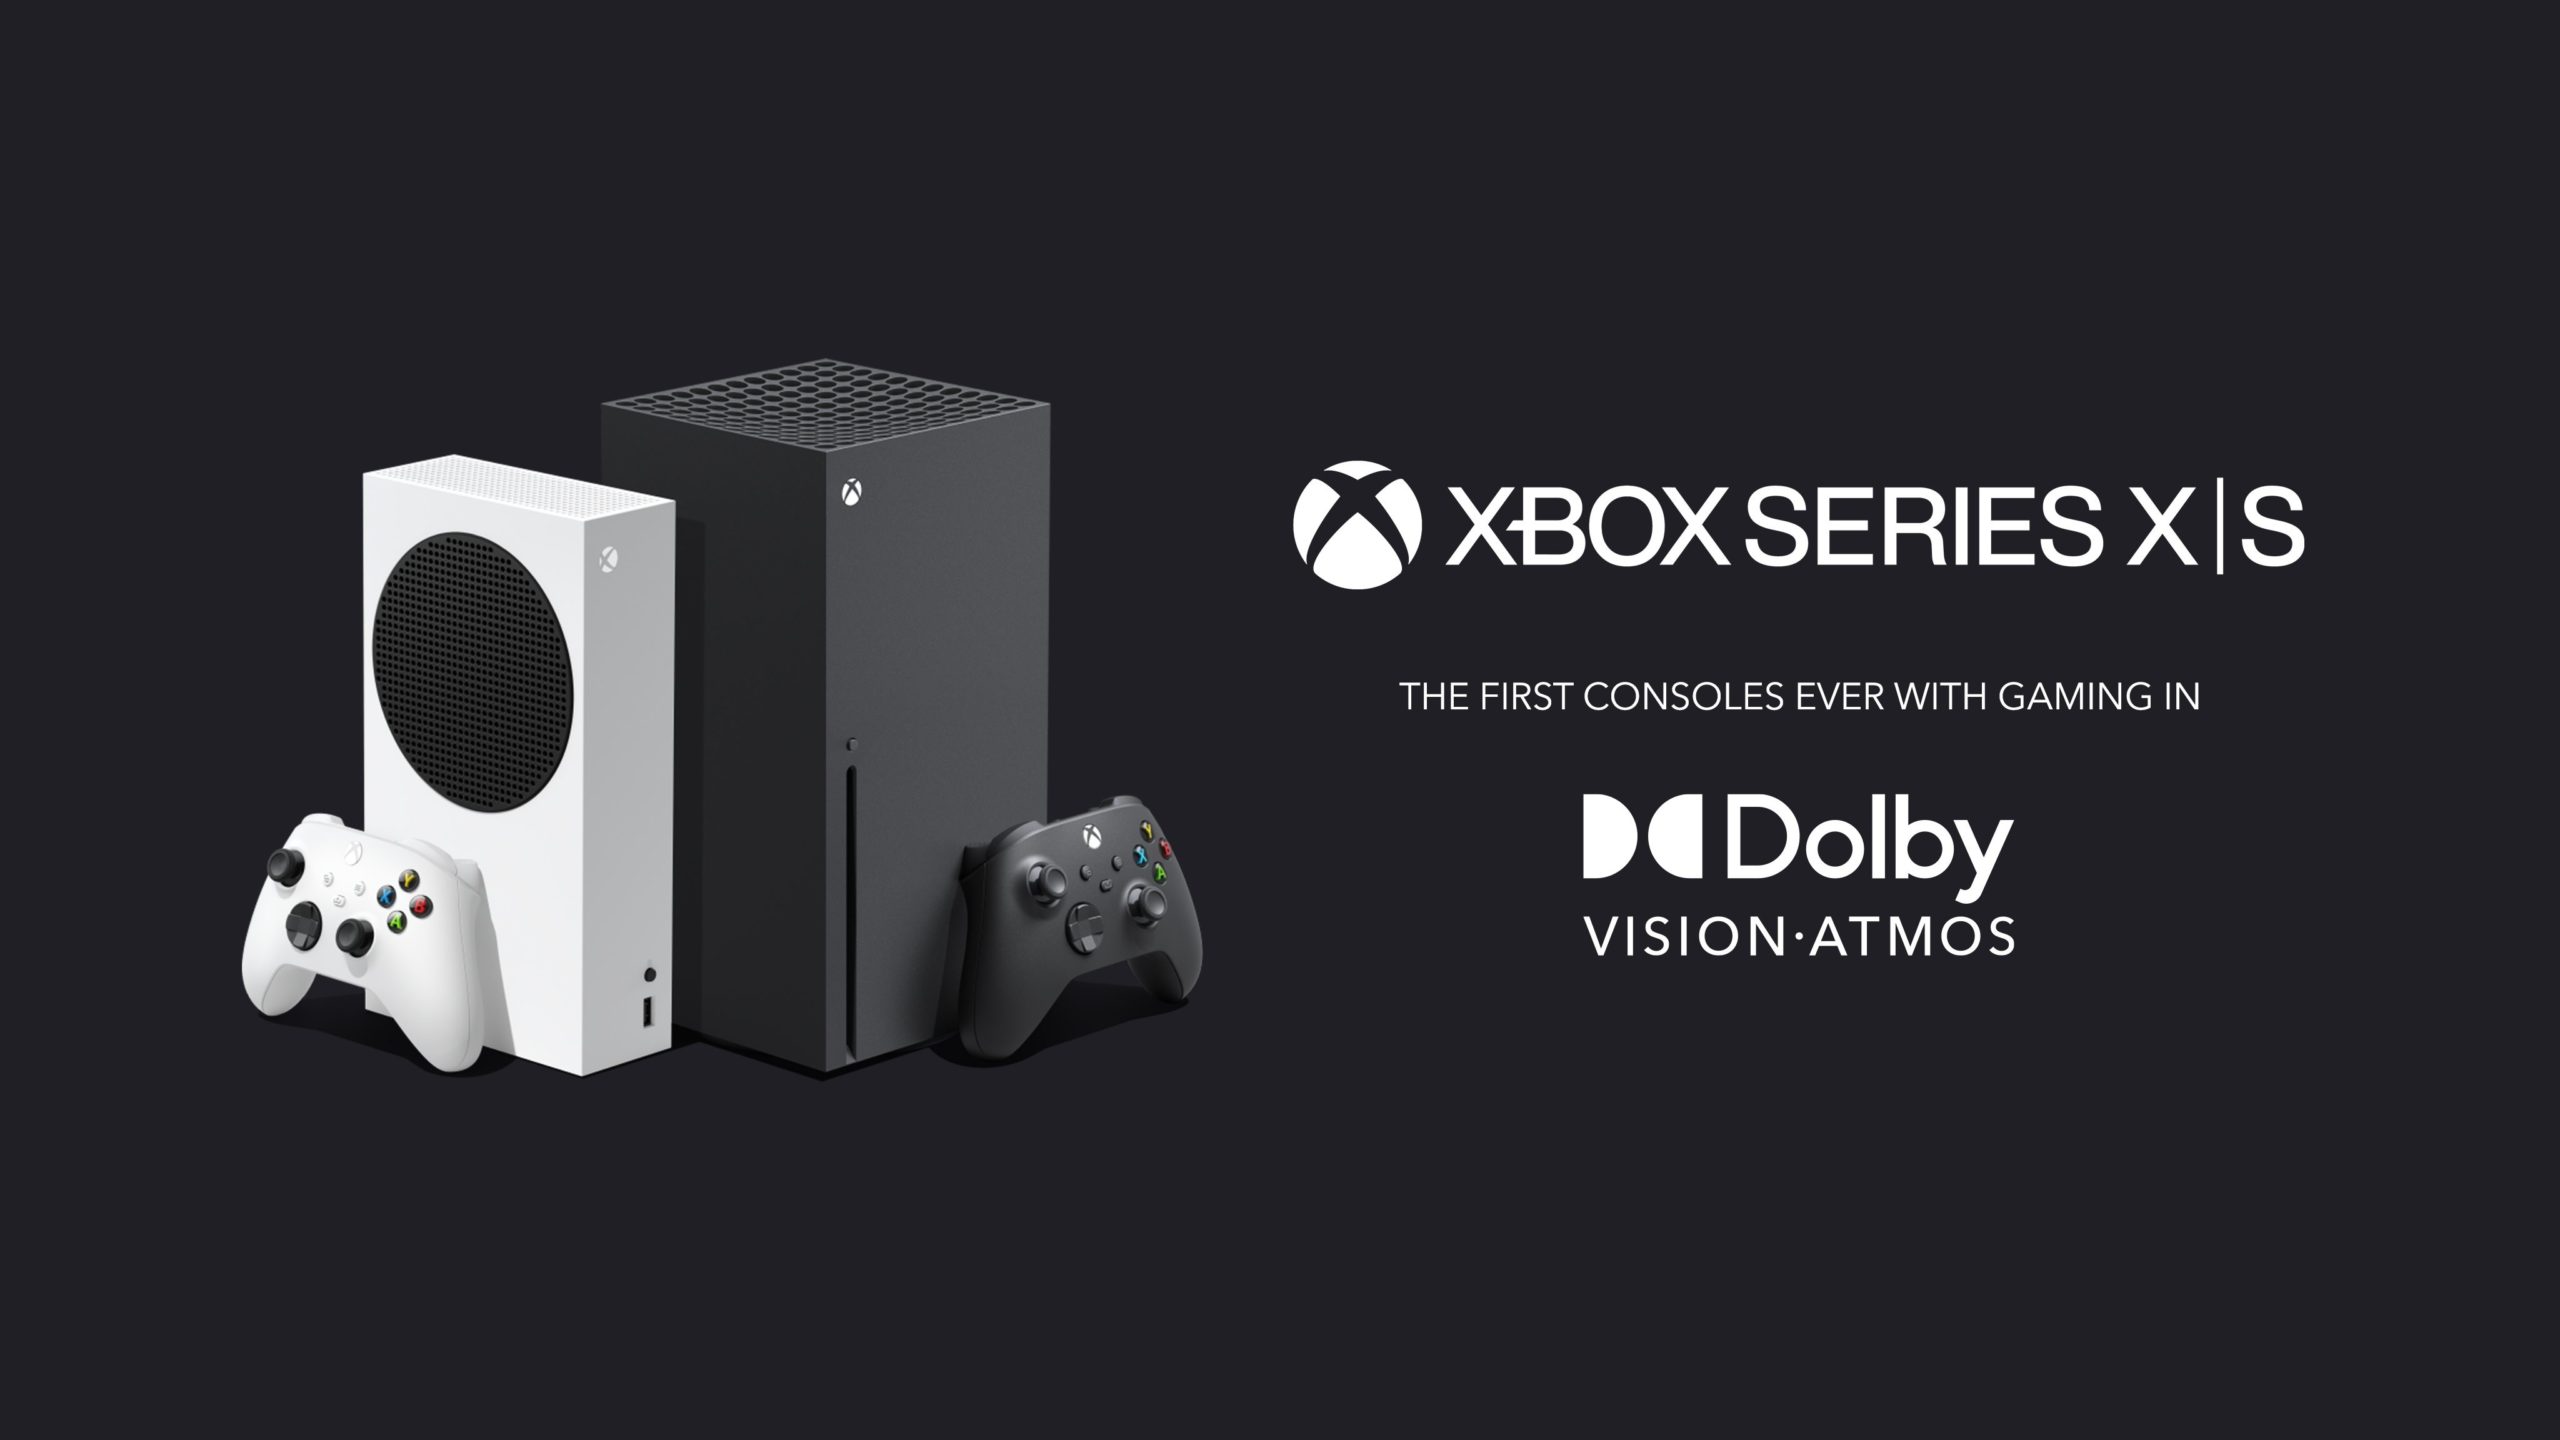 Dolby Atmos and Dolby vision in a console-exclusive deal with Xbox